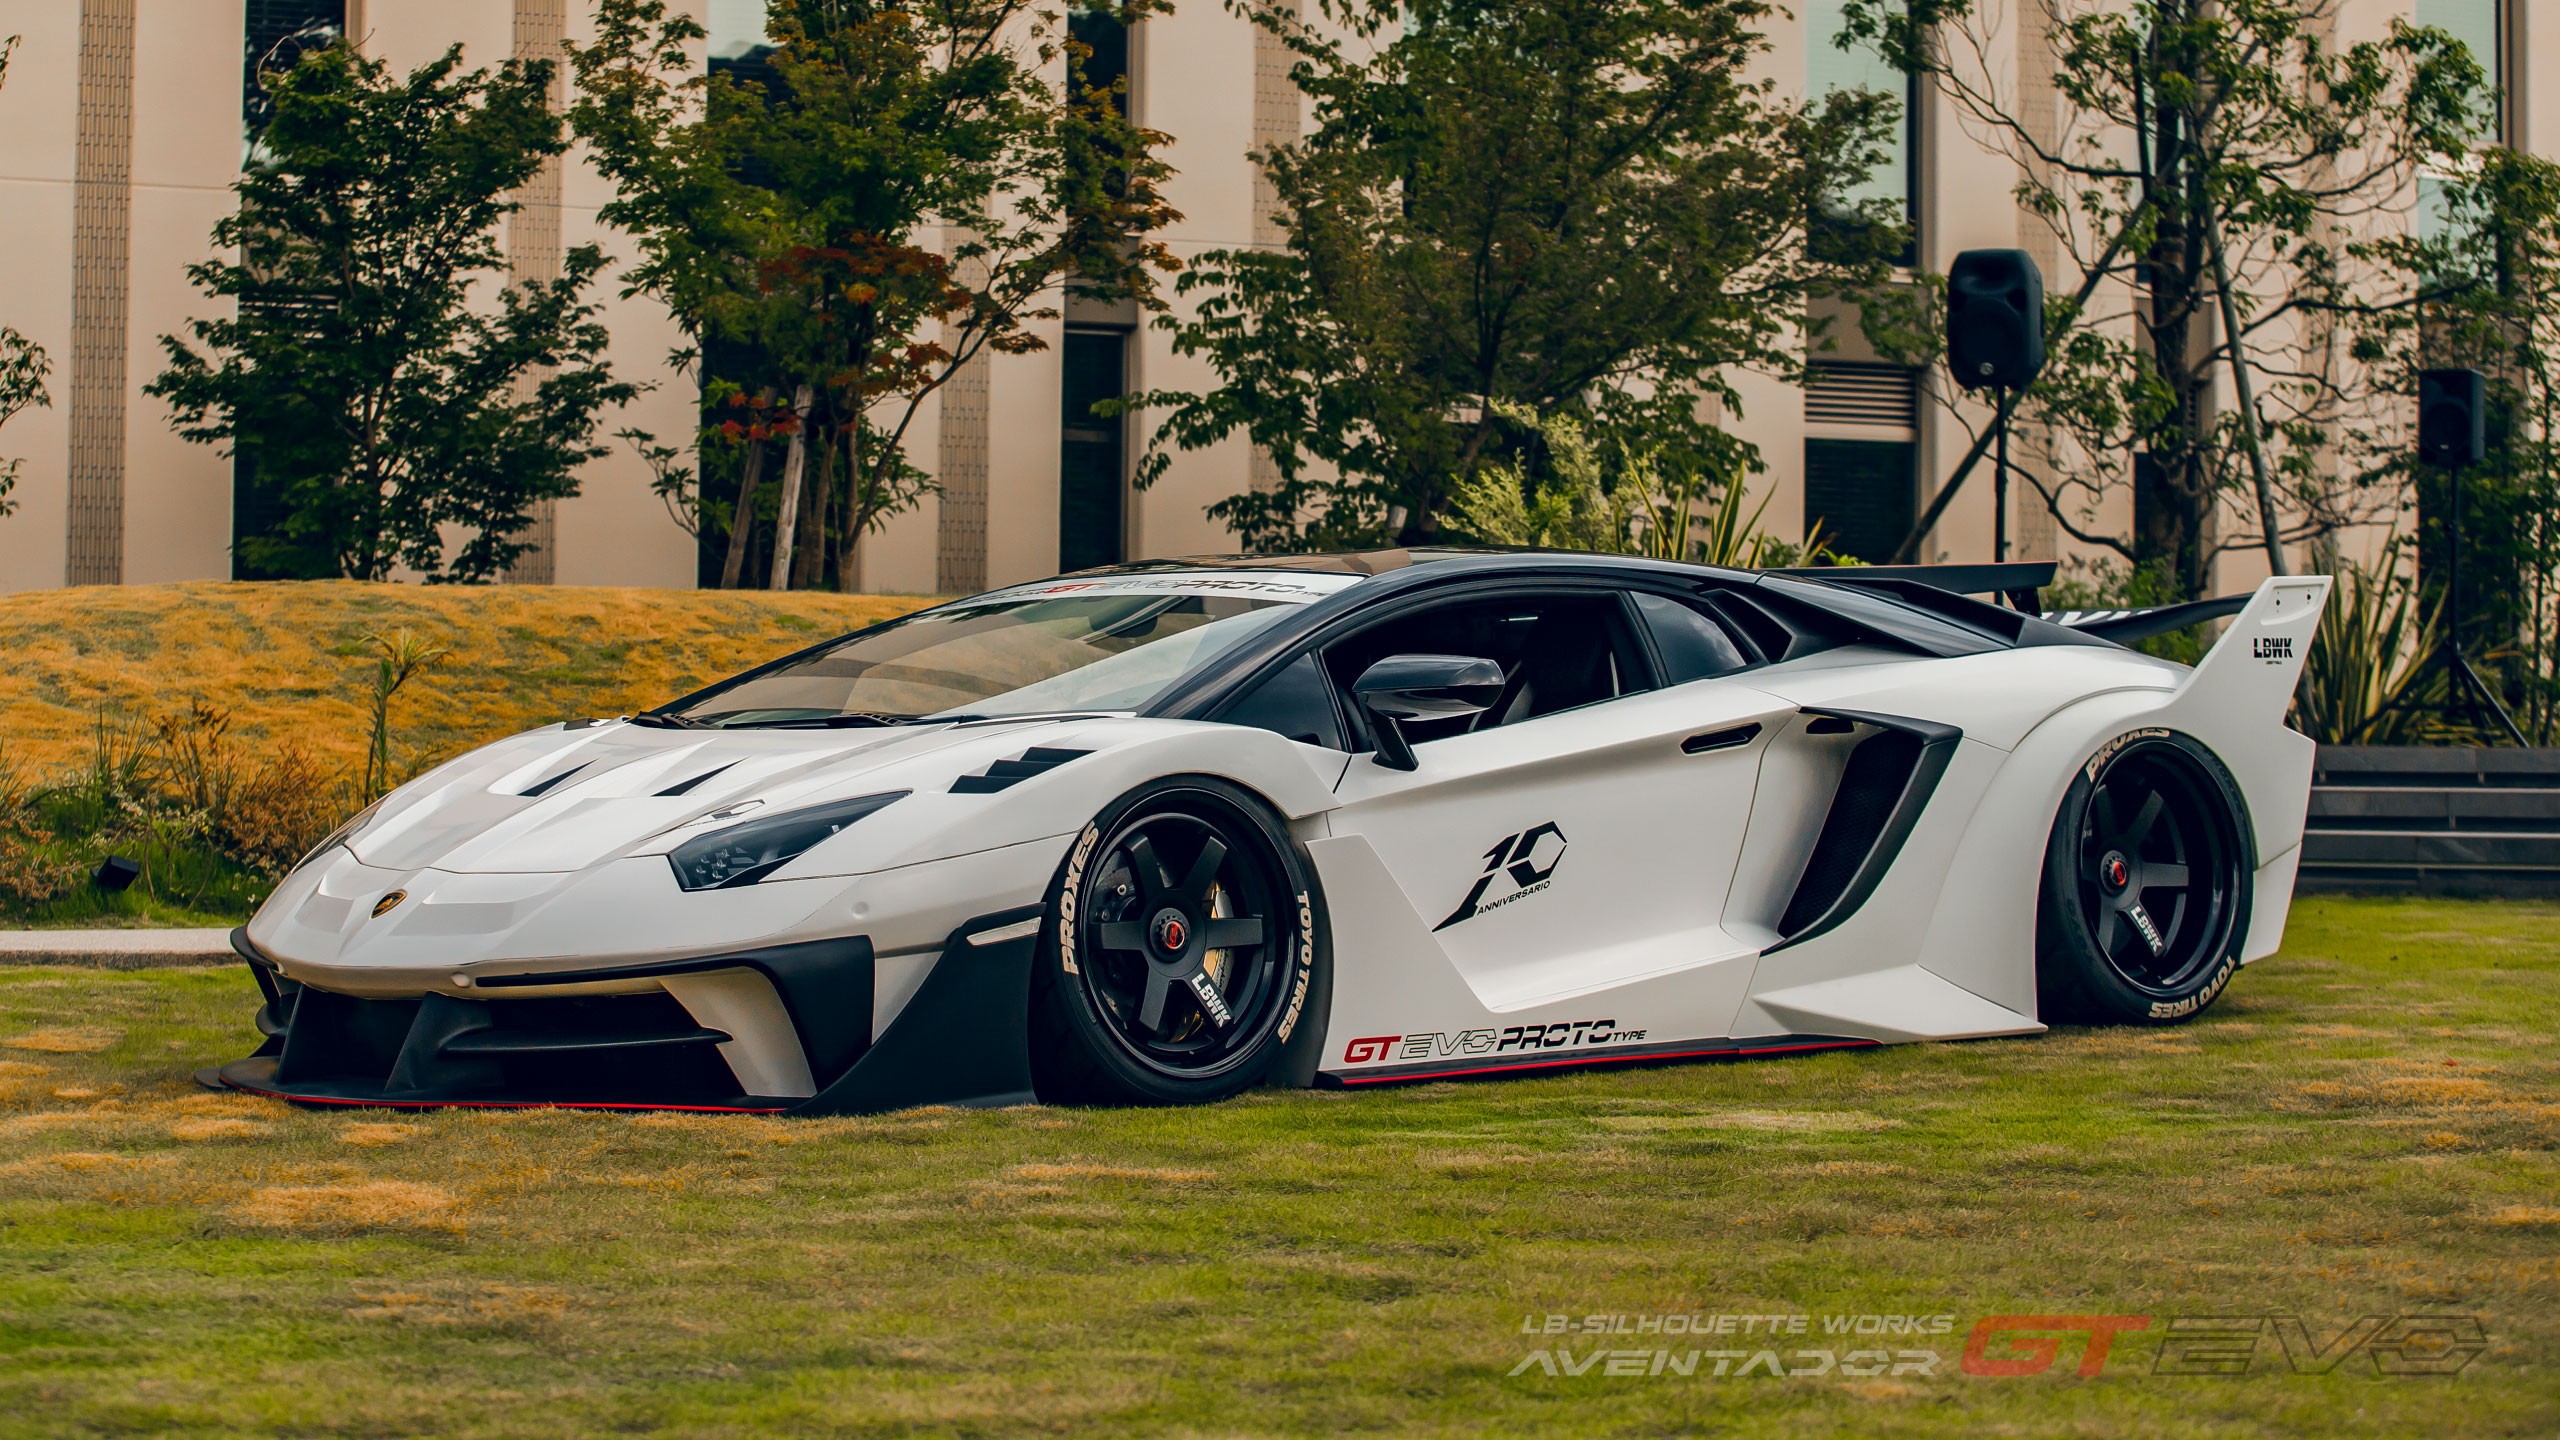 Liberty Walks Body Kit For The Lamborghini Aventador Costs As Much As